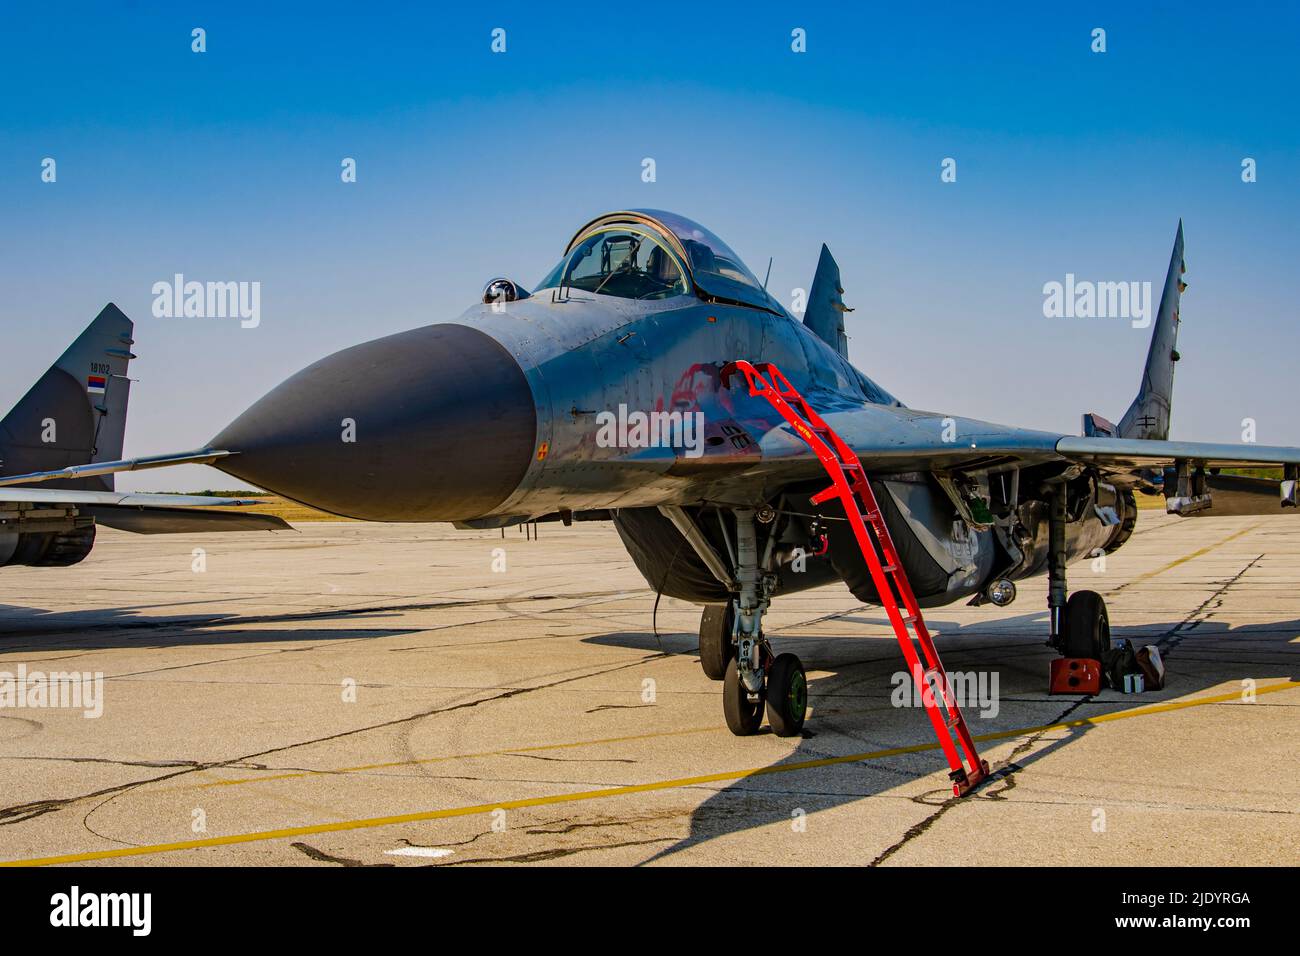 Belgrade, Serbia - September 2, 2012: Russian Mig-29 jet fighter aircraft of Serbian Airforce. This multi role fighter aircraft was introduced at July Stock Photo